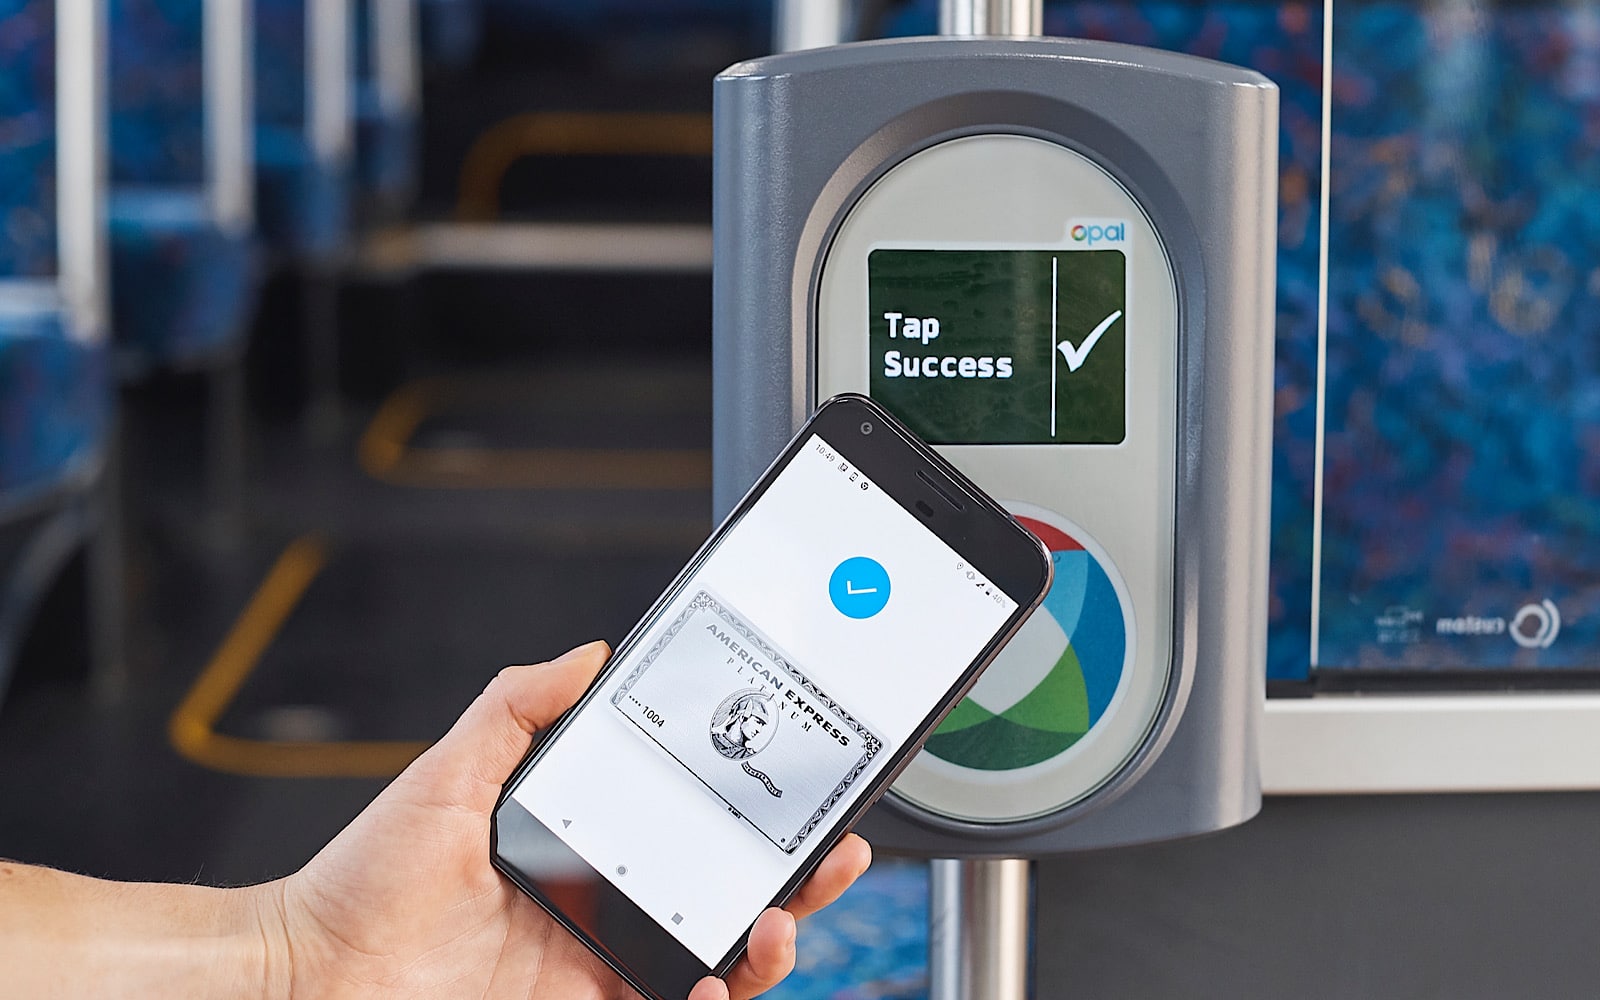 American Express used at an Opal reader on NSW buses